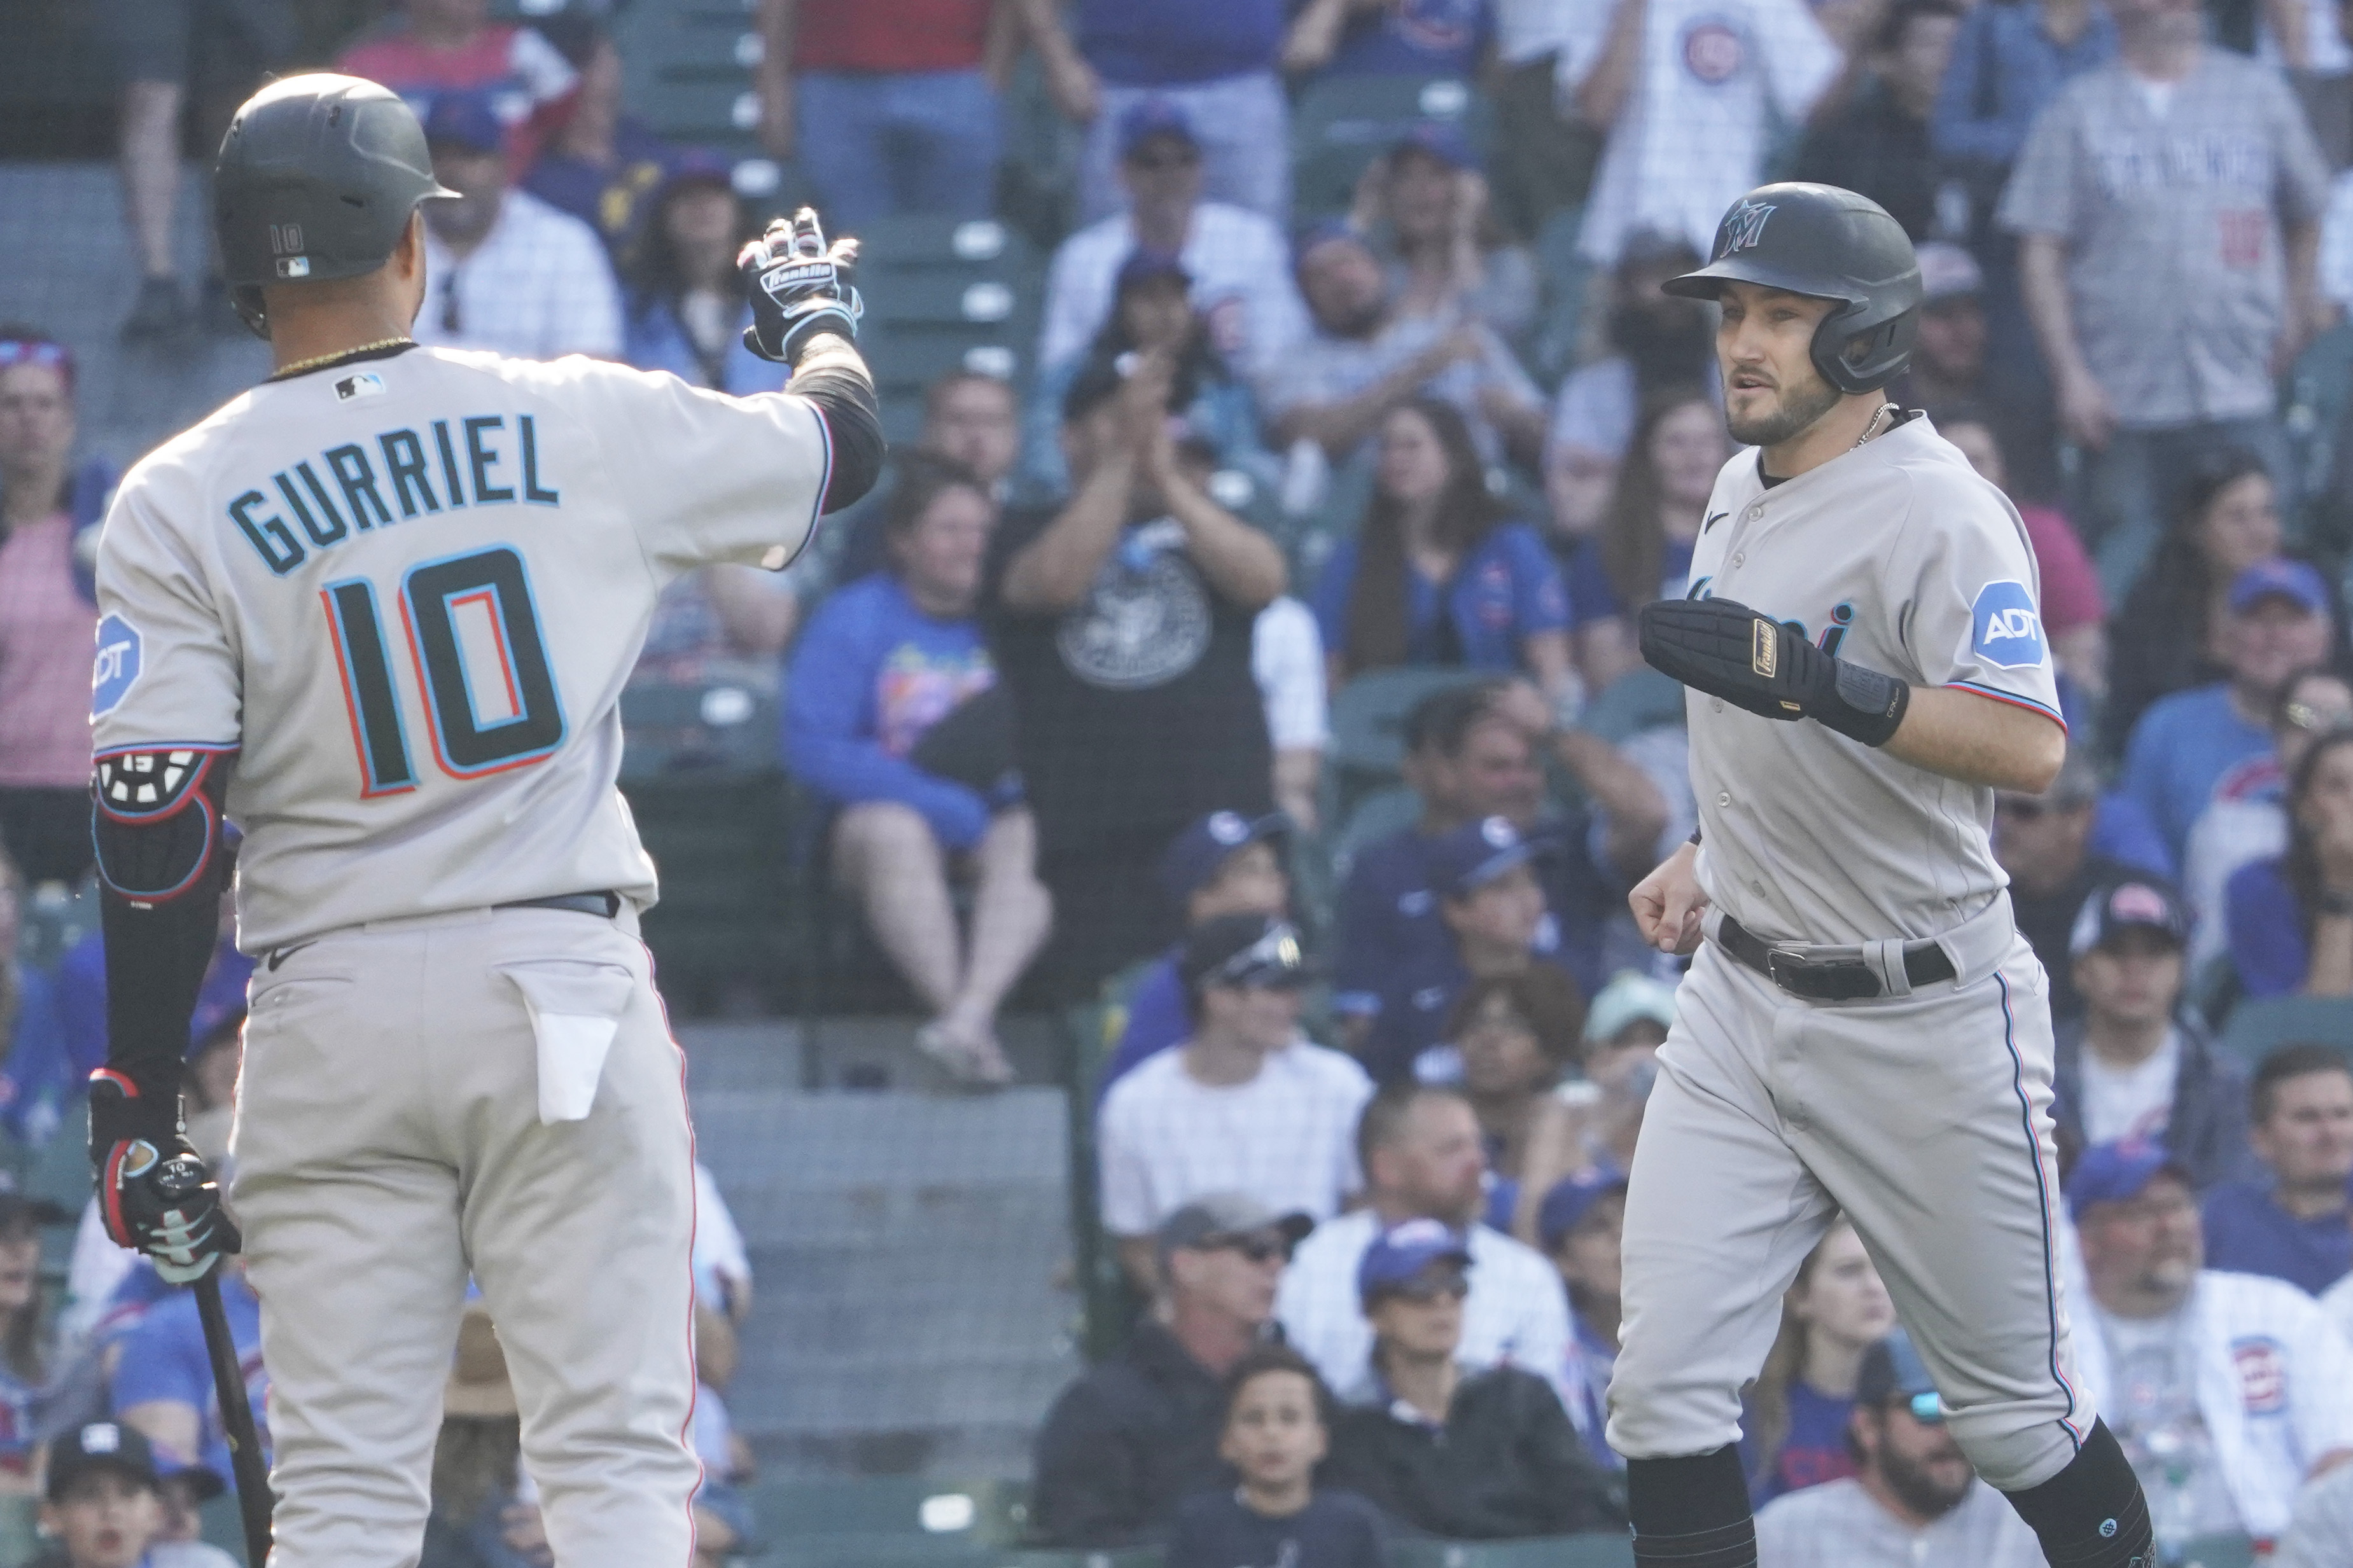 Marlins top Cubs in 14 innings, tie major league record with 11-0